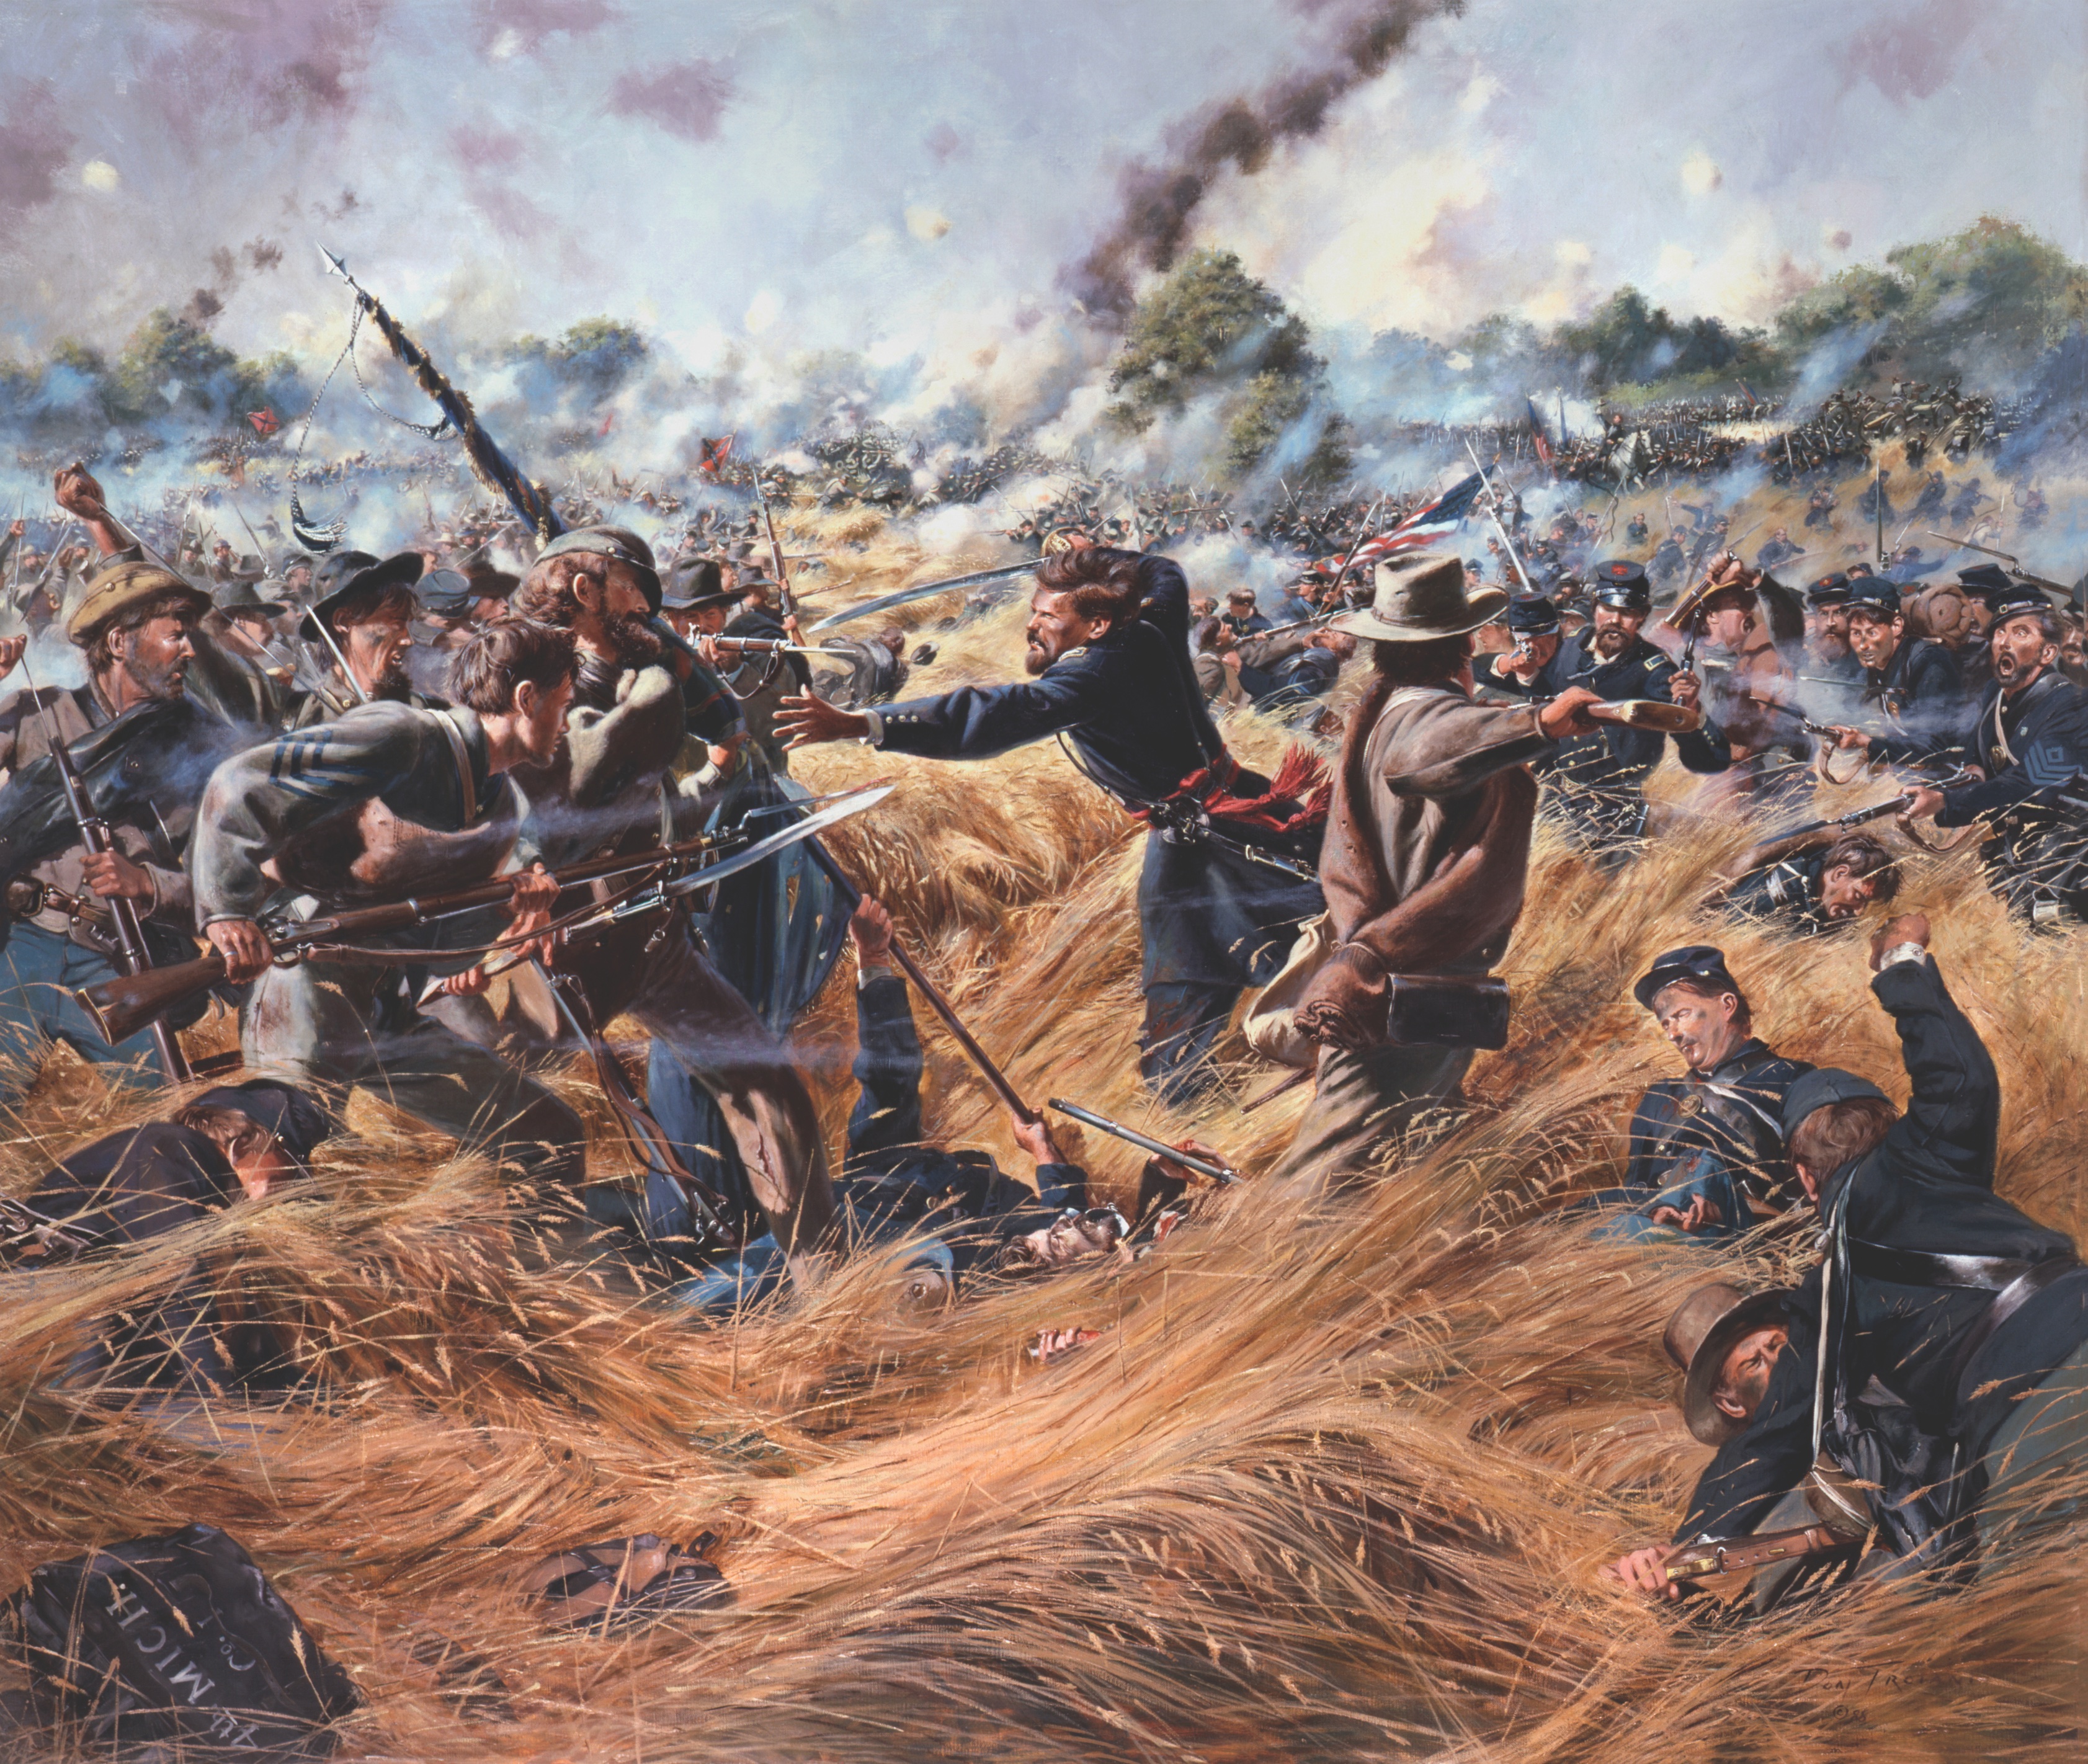 At Gettysburg on July 2, the 118th Pennsylvania fought to the west of the notorious Wheatfield, a portion of which is depicted here. (© Don Troian/Bridgeman Images)